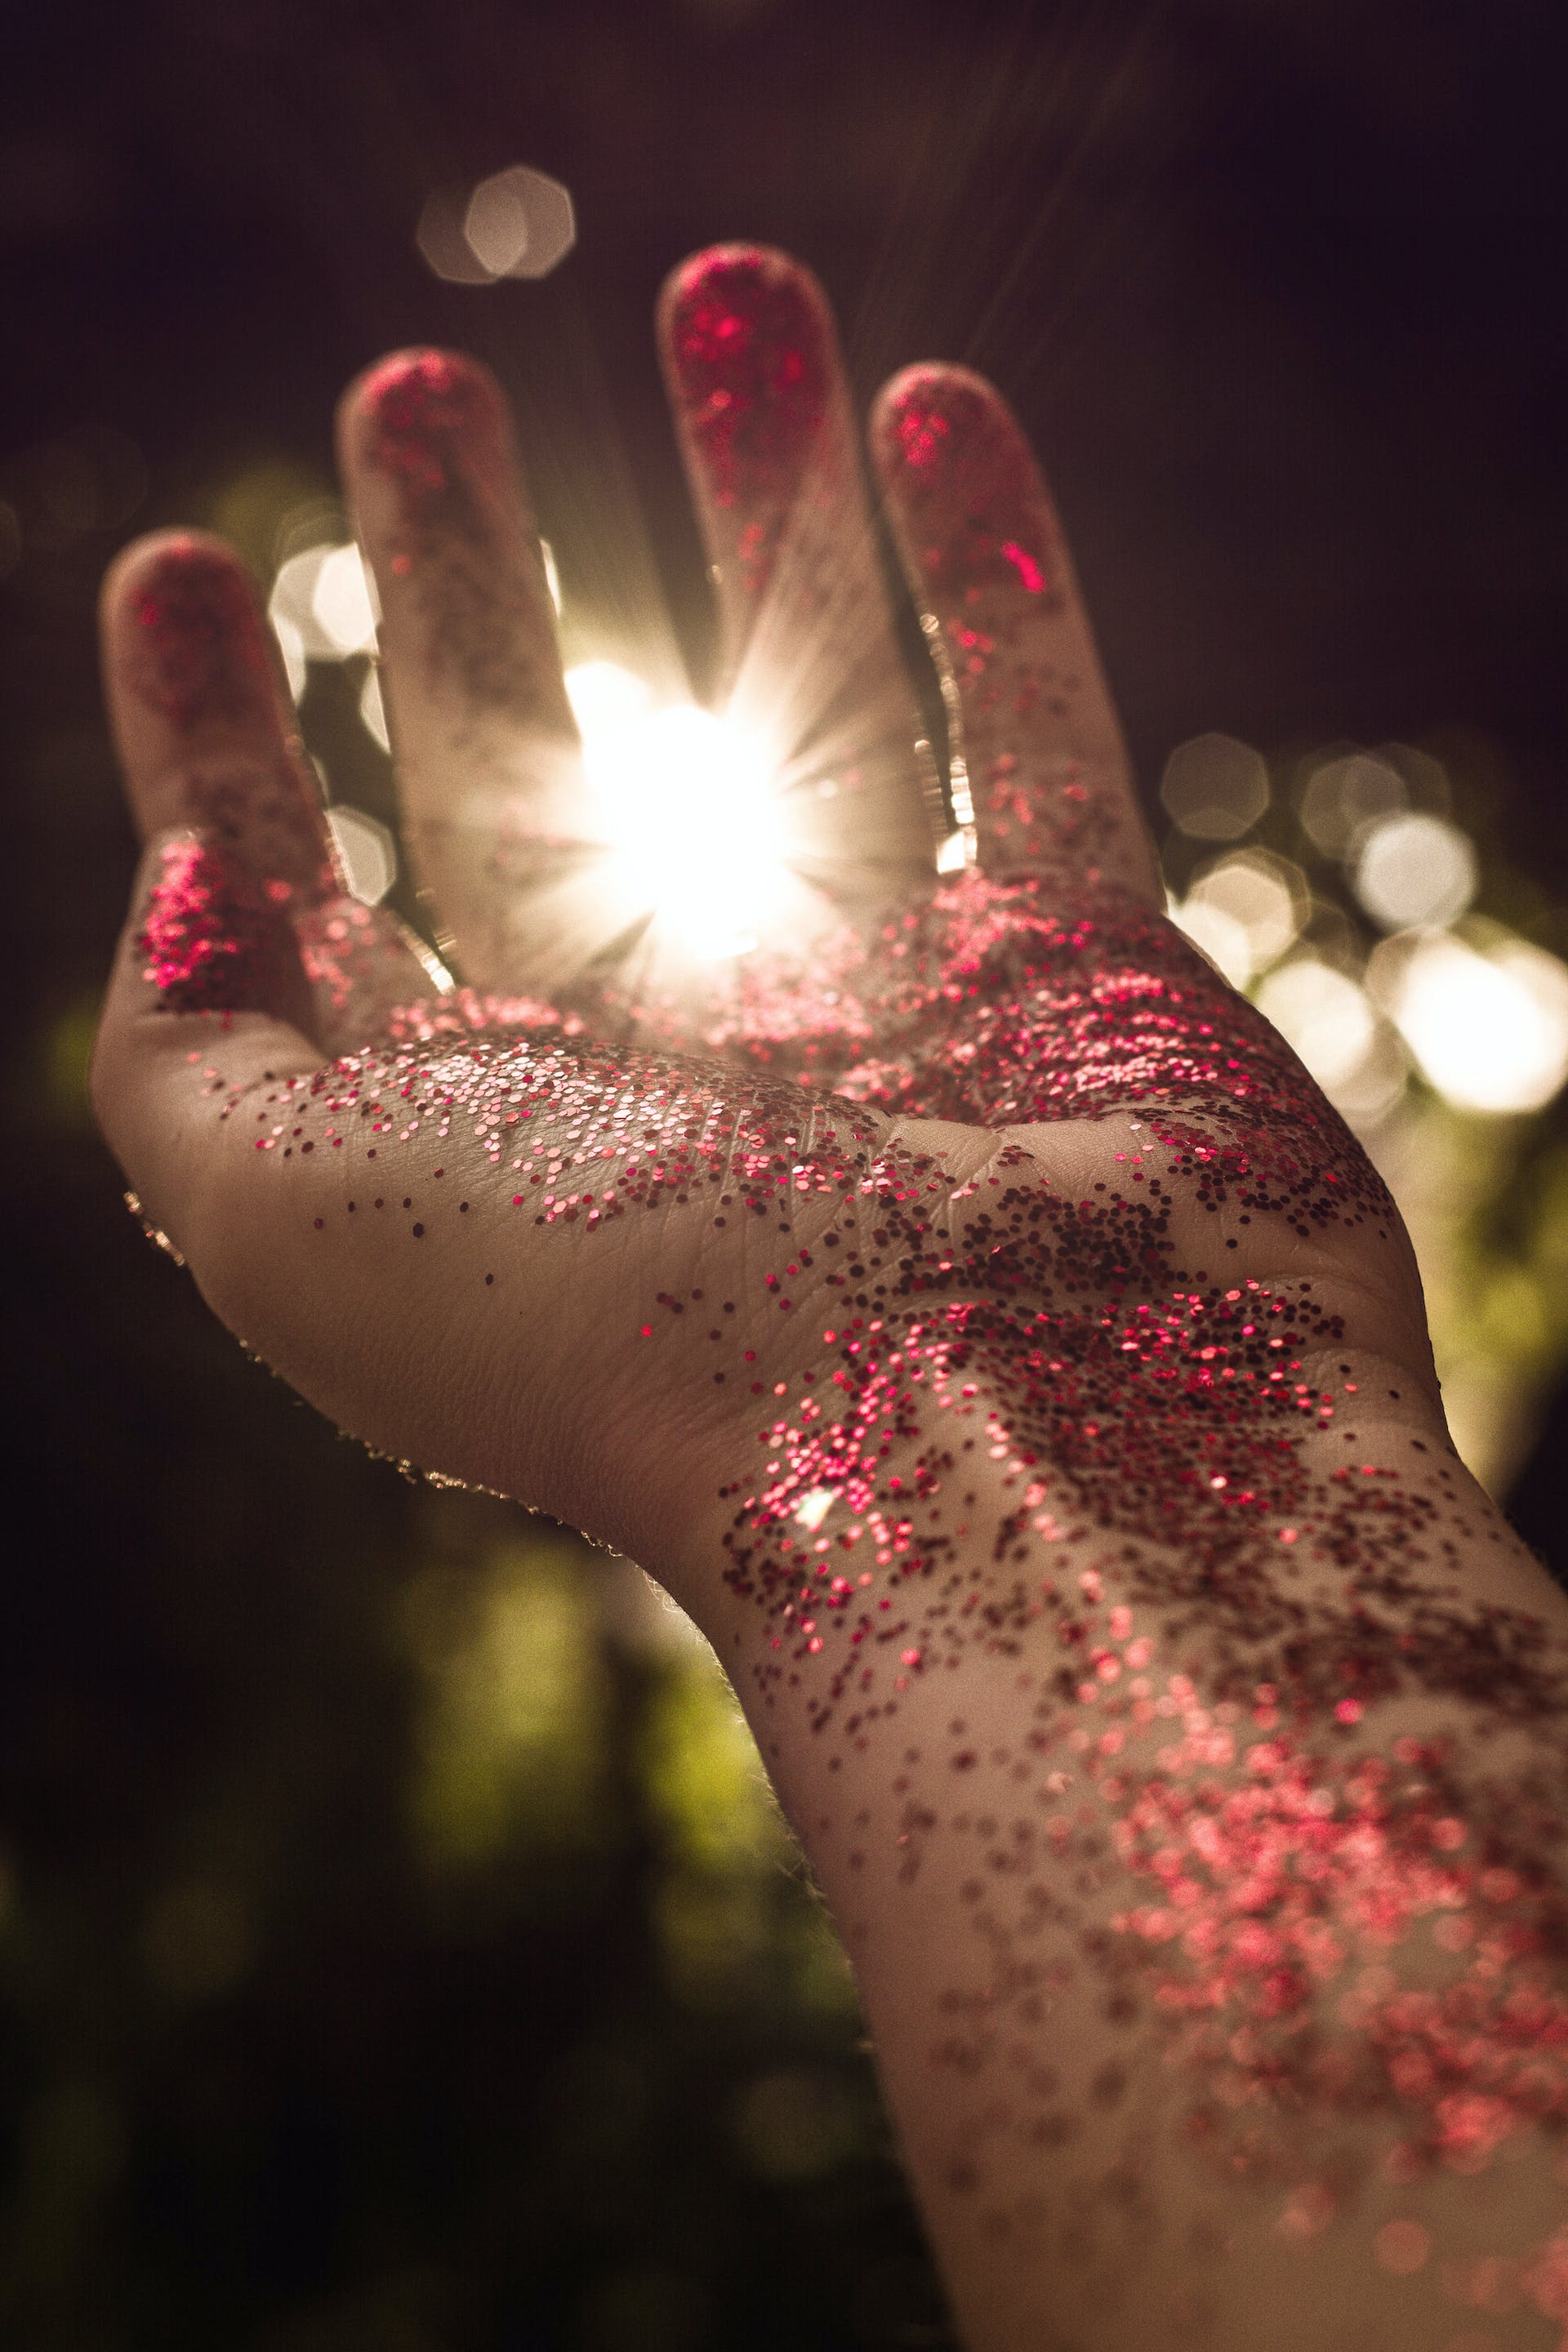 Red glitter on a person's hand | Source: Pexels